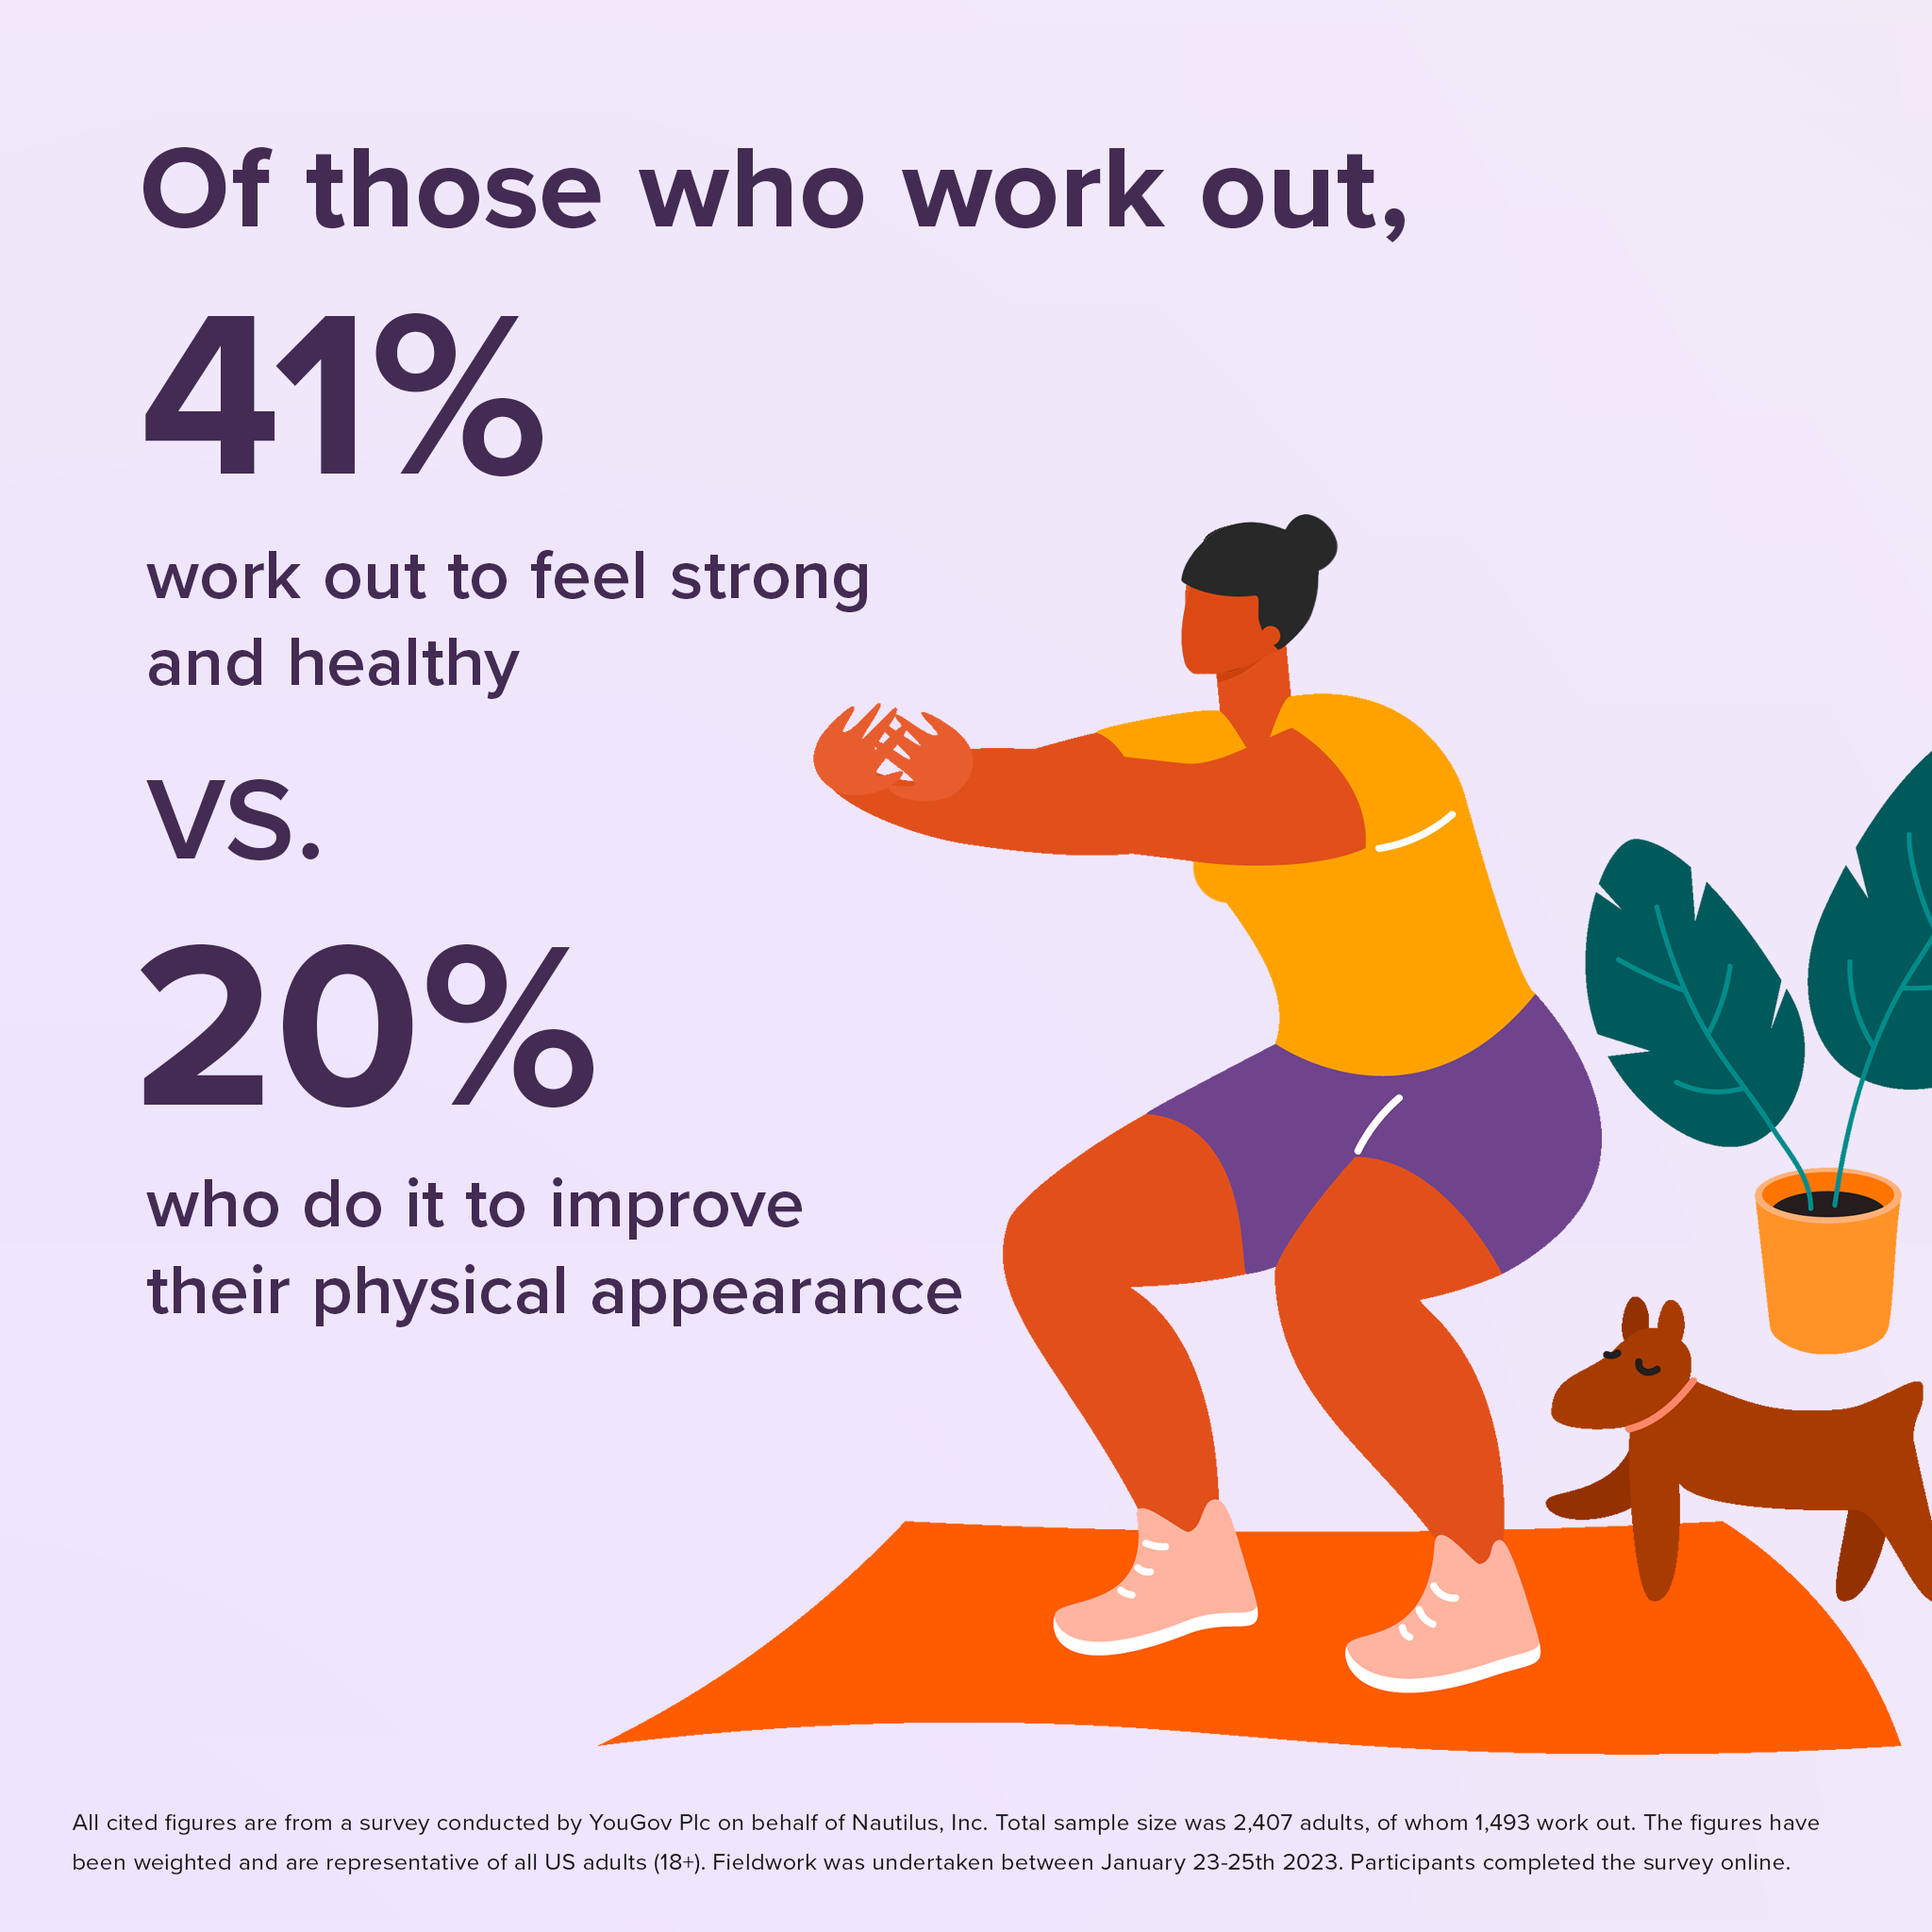 Nautilus, Inc survey reveals  the most popular reason for working out is the feel strong and healthy